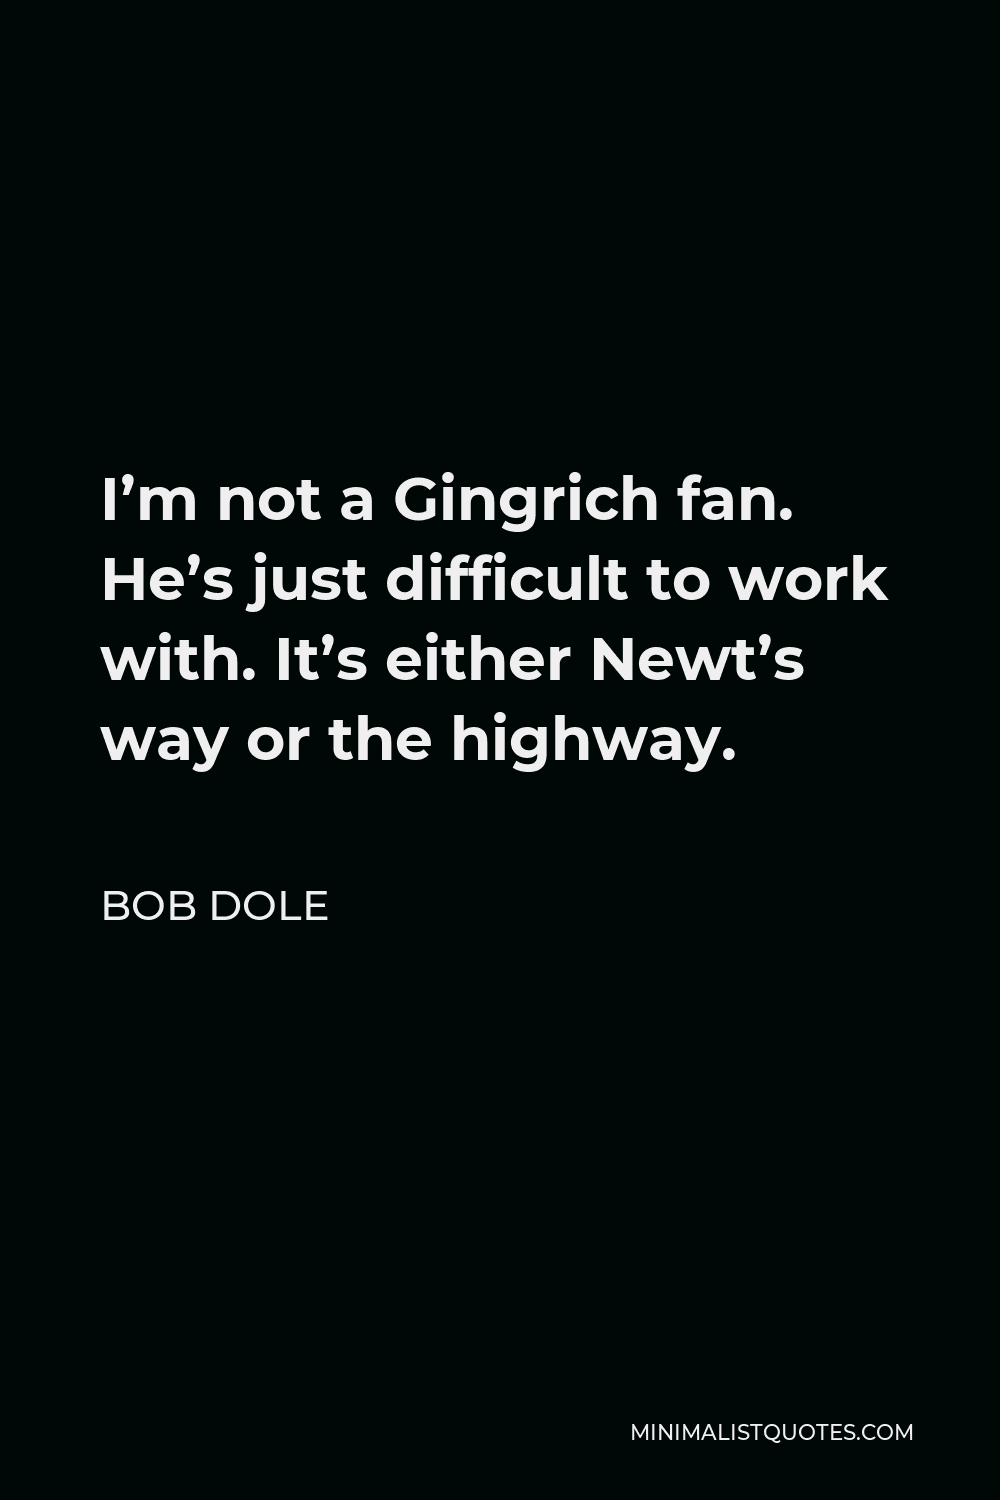 Bob Dole Quote - I’m not a Gingrich fan. He’s just difficult to work with. It’s either Newt’s way or the highway.